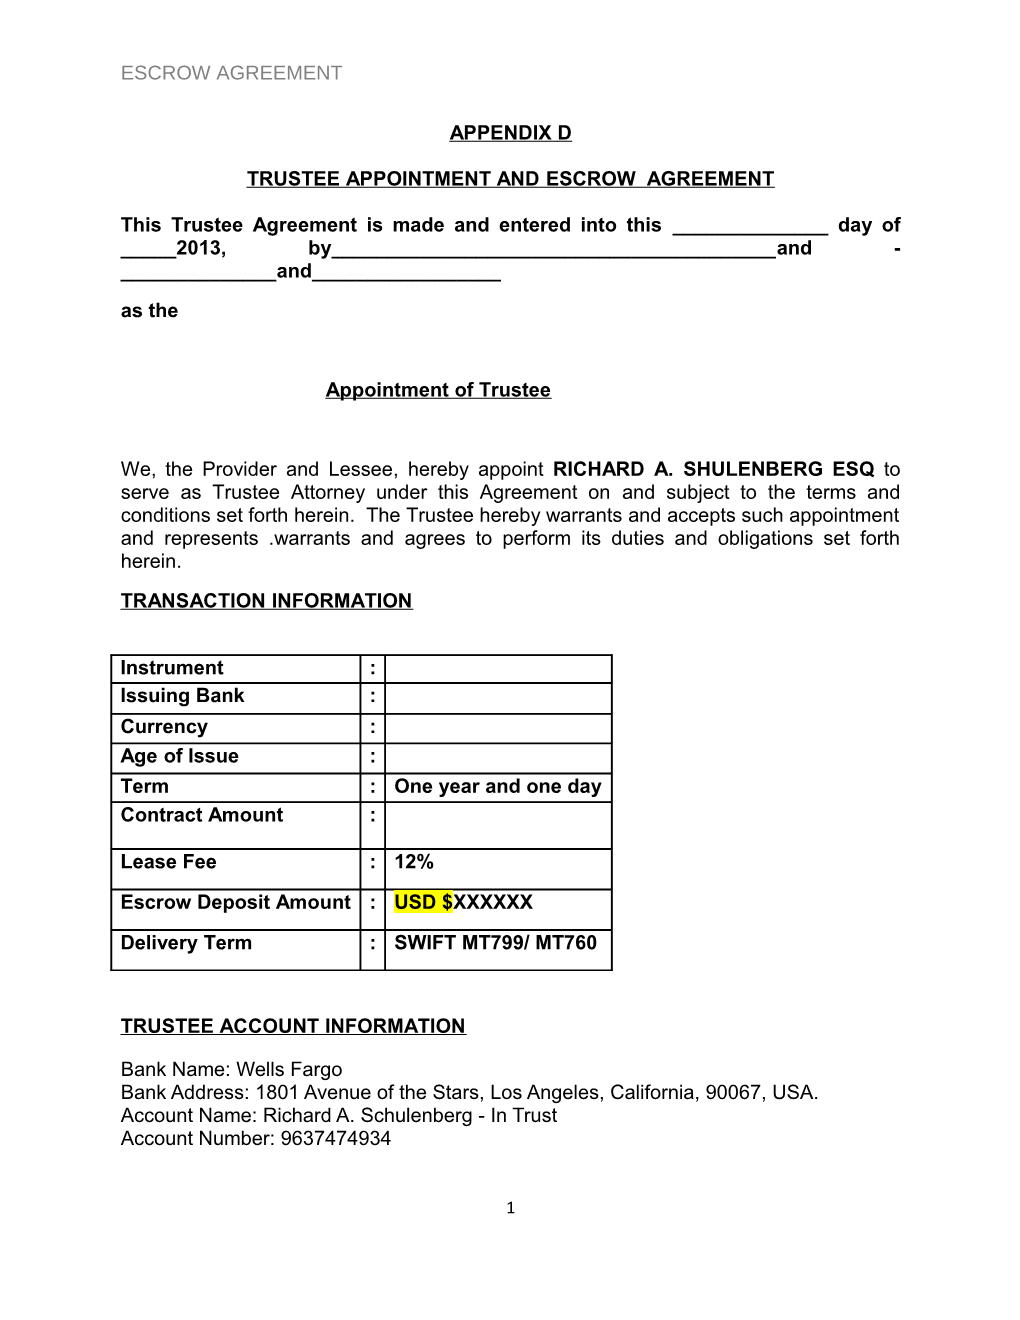 Trustee Appointment and Escrow Agreement